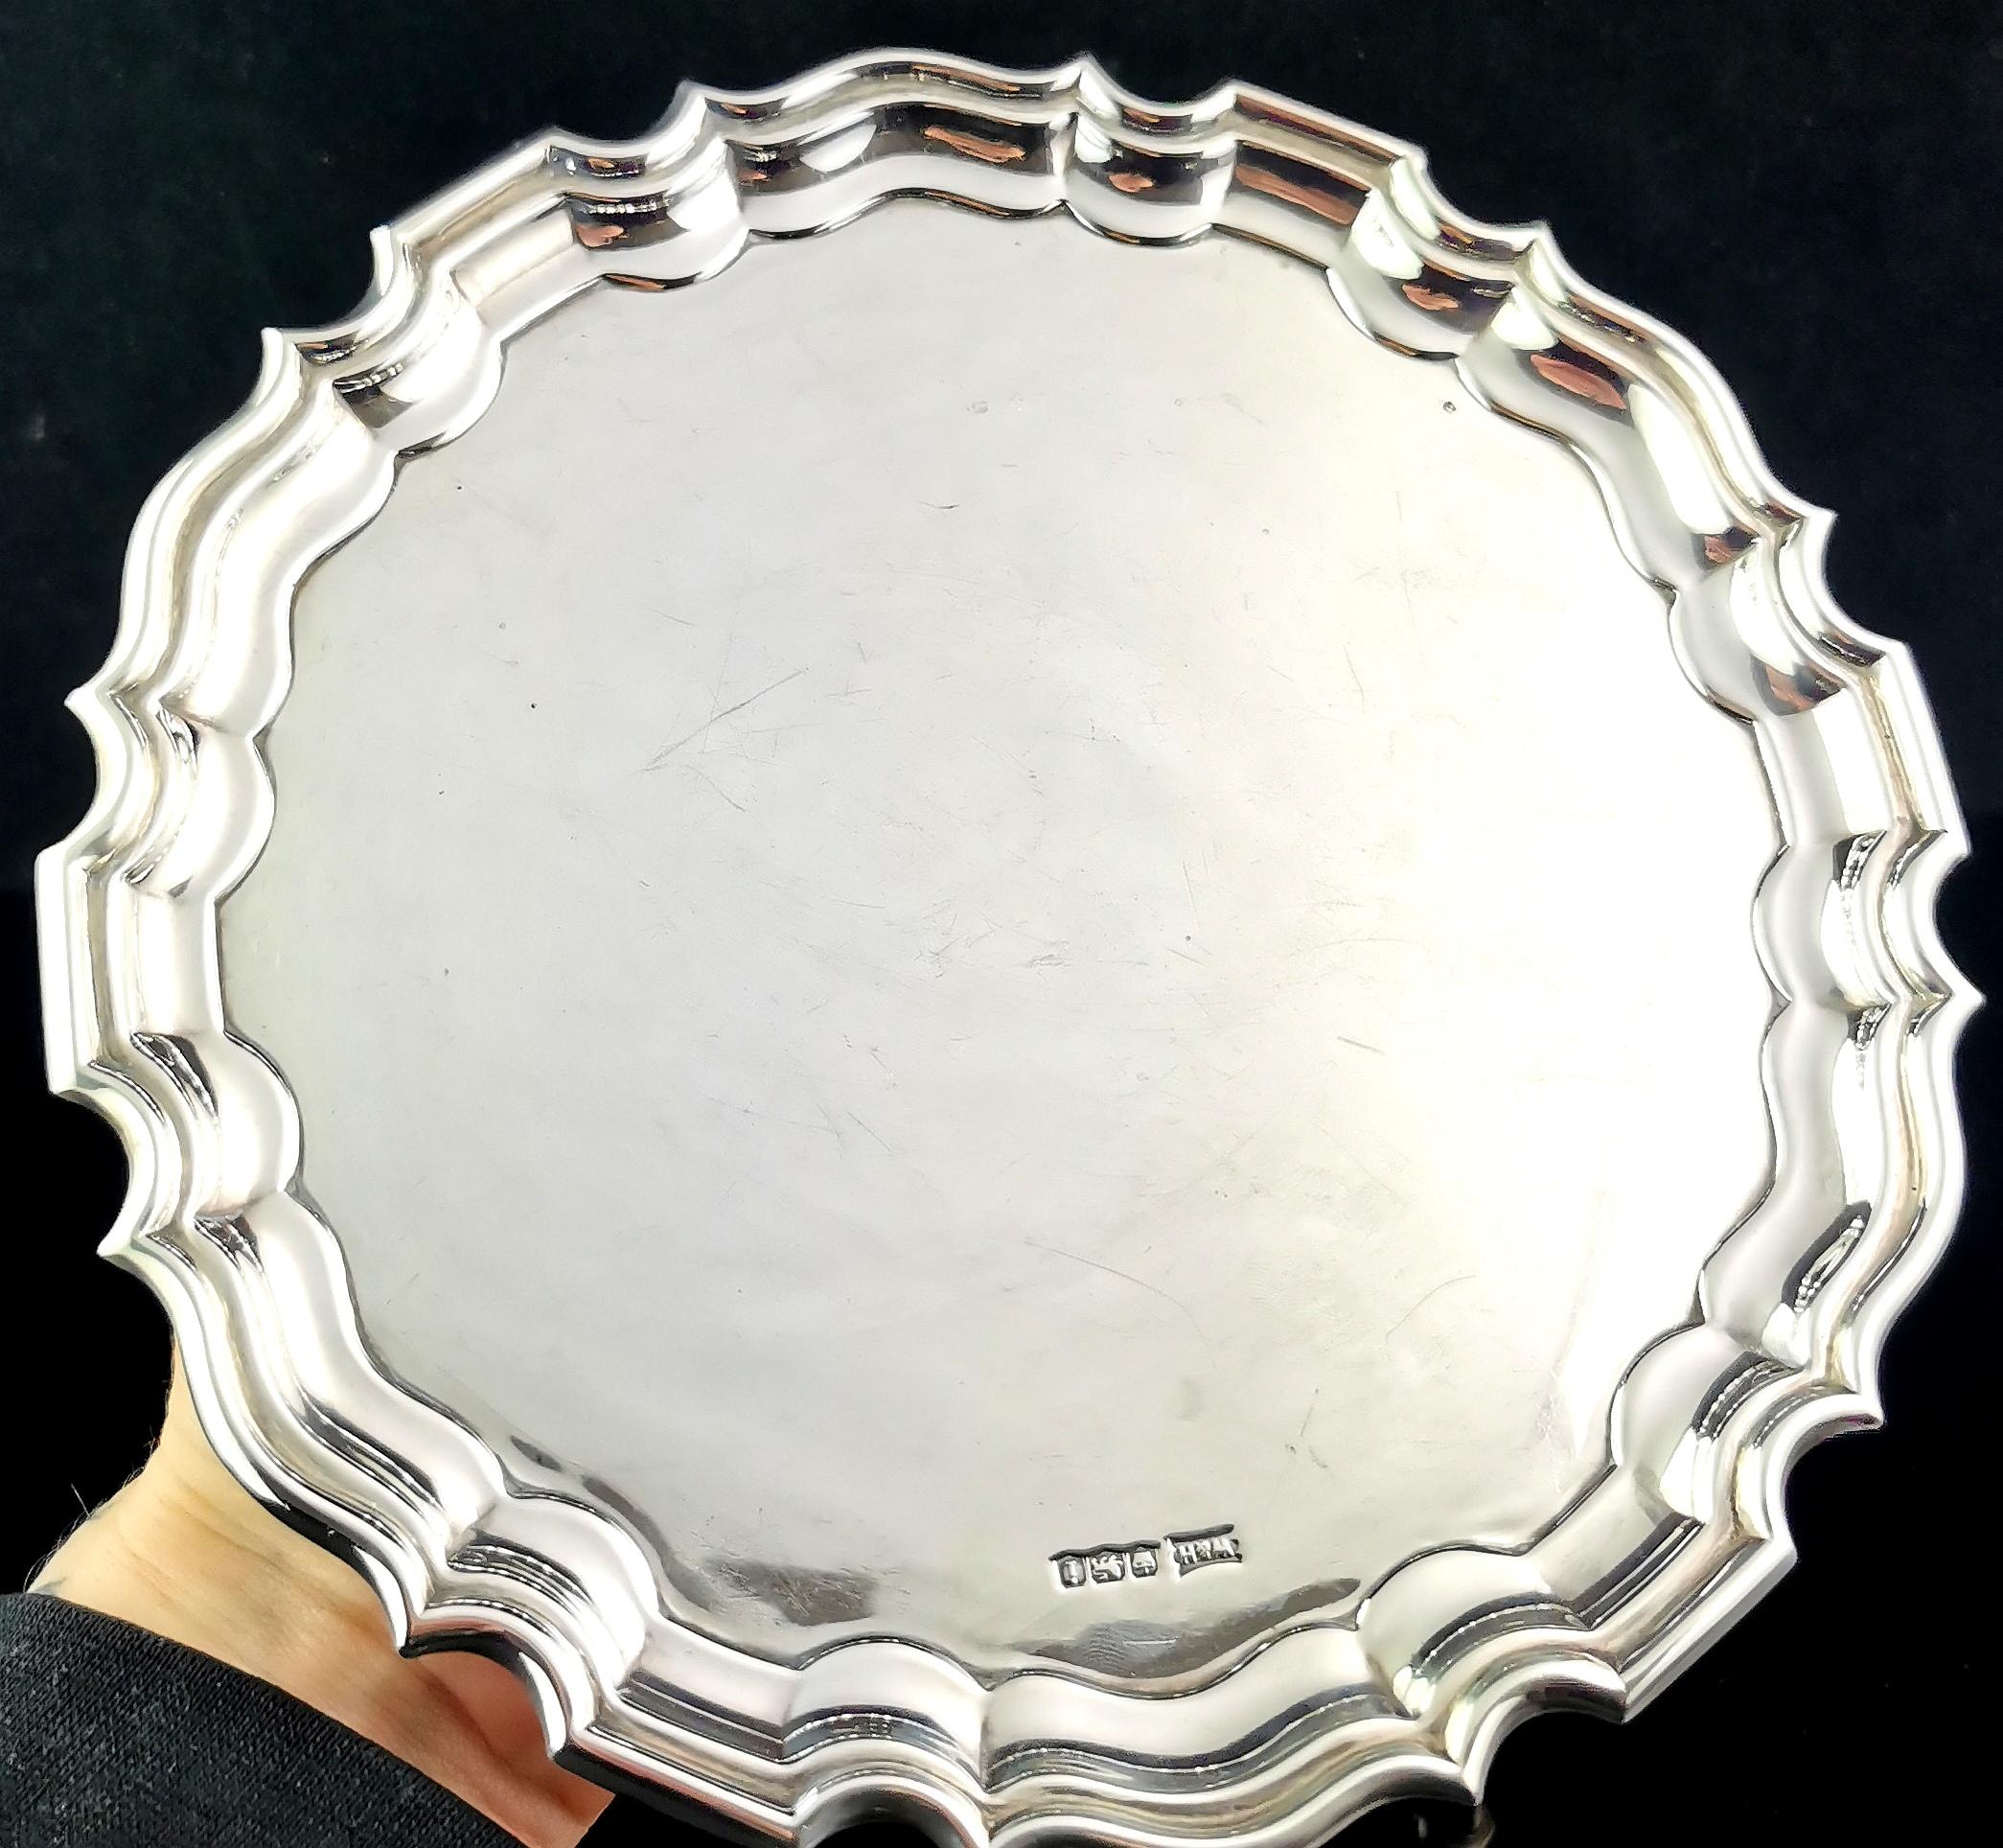 An attractive vintage Art Deco era sterling silver salver.

It has an attractive scalloped double rim edge and stands on volute feet.

A handsome and well made salver by a renowned maker, Walker and Hall.

The tray has elements of Art Deco design